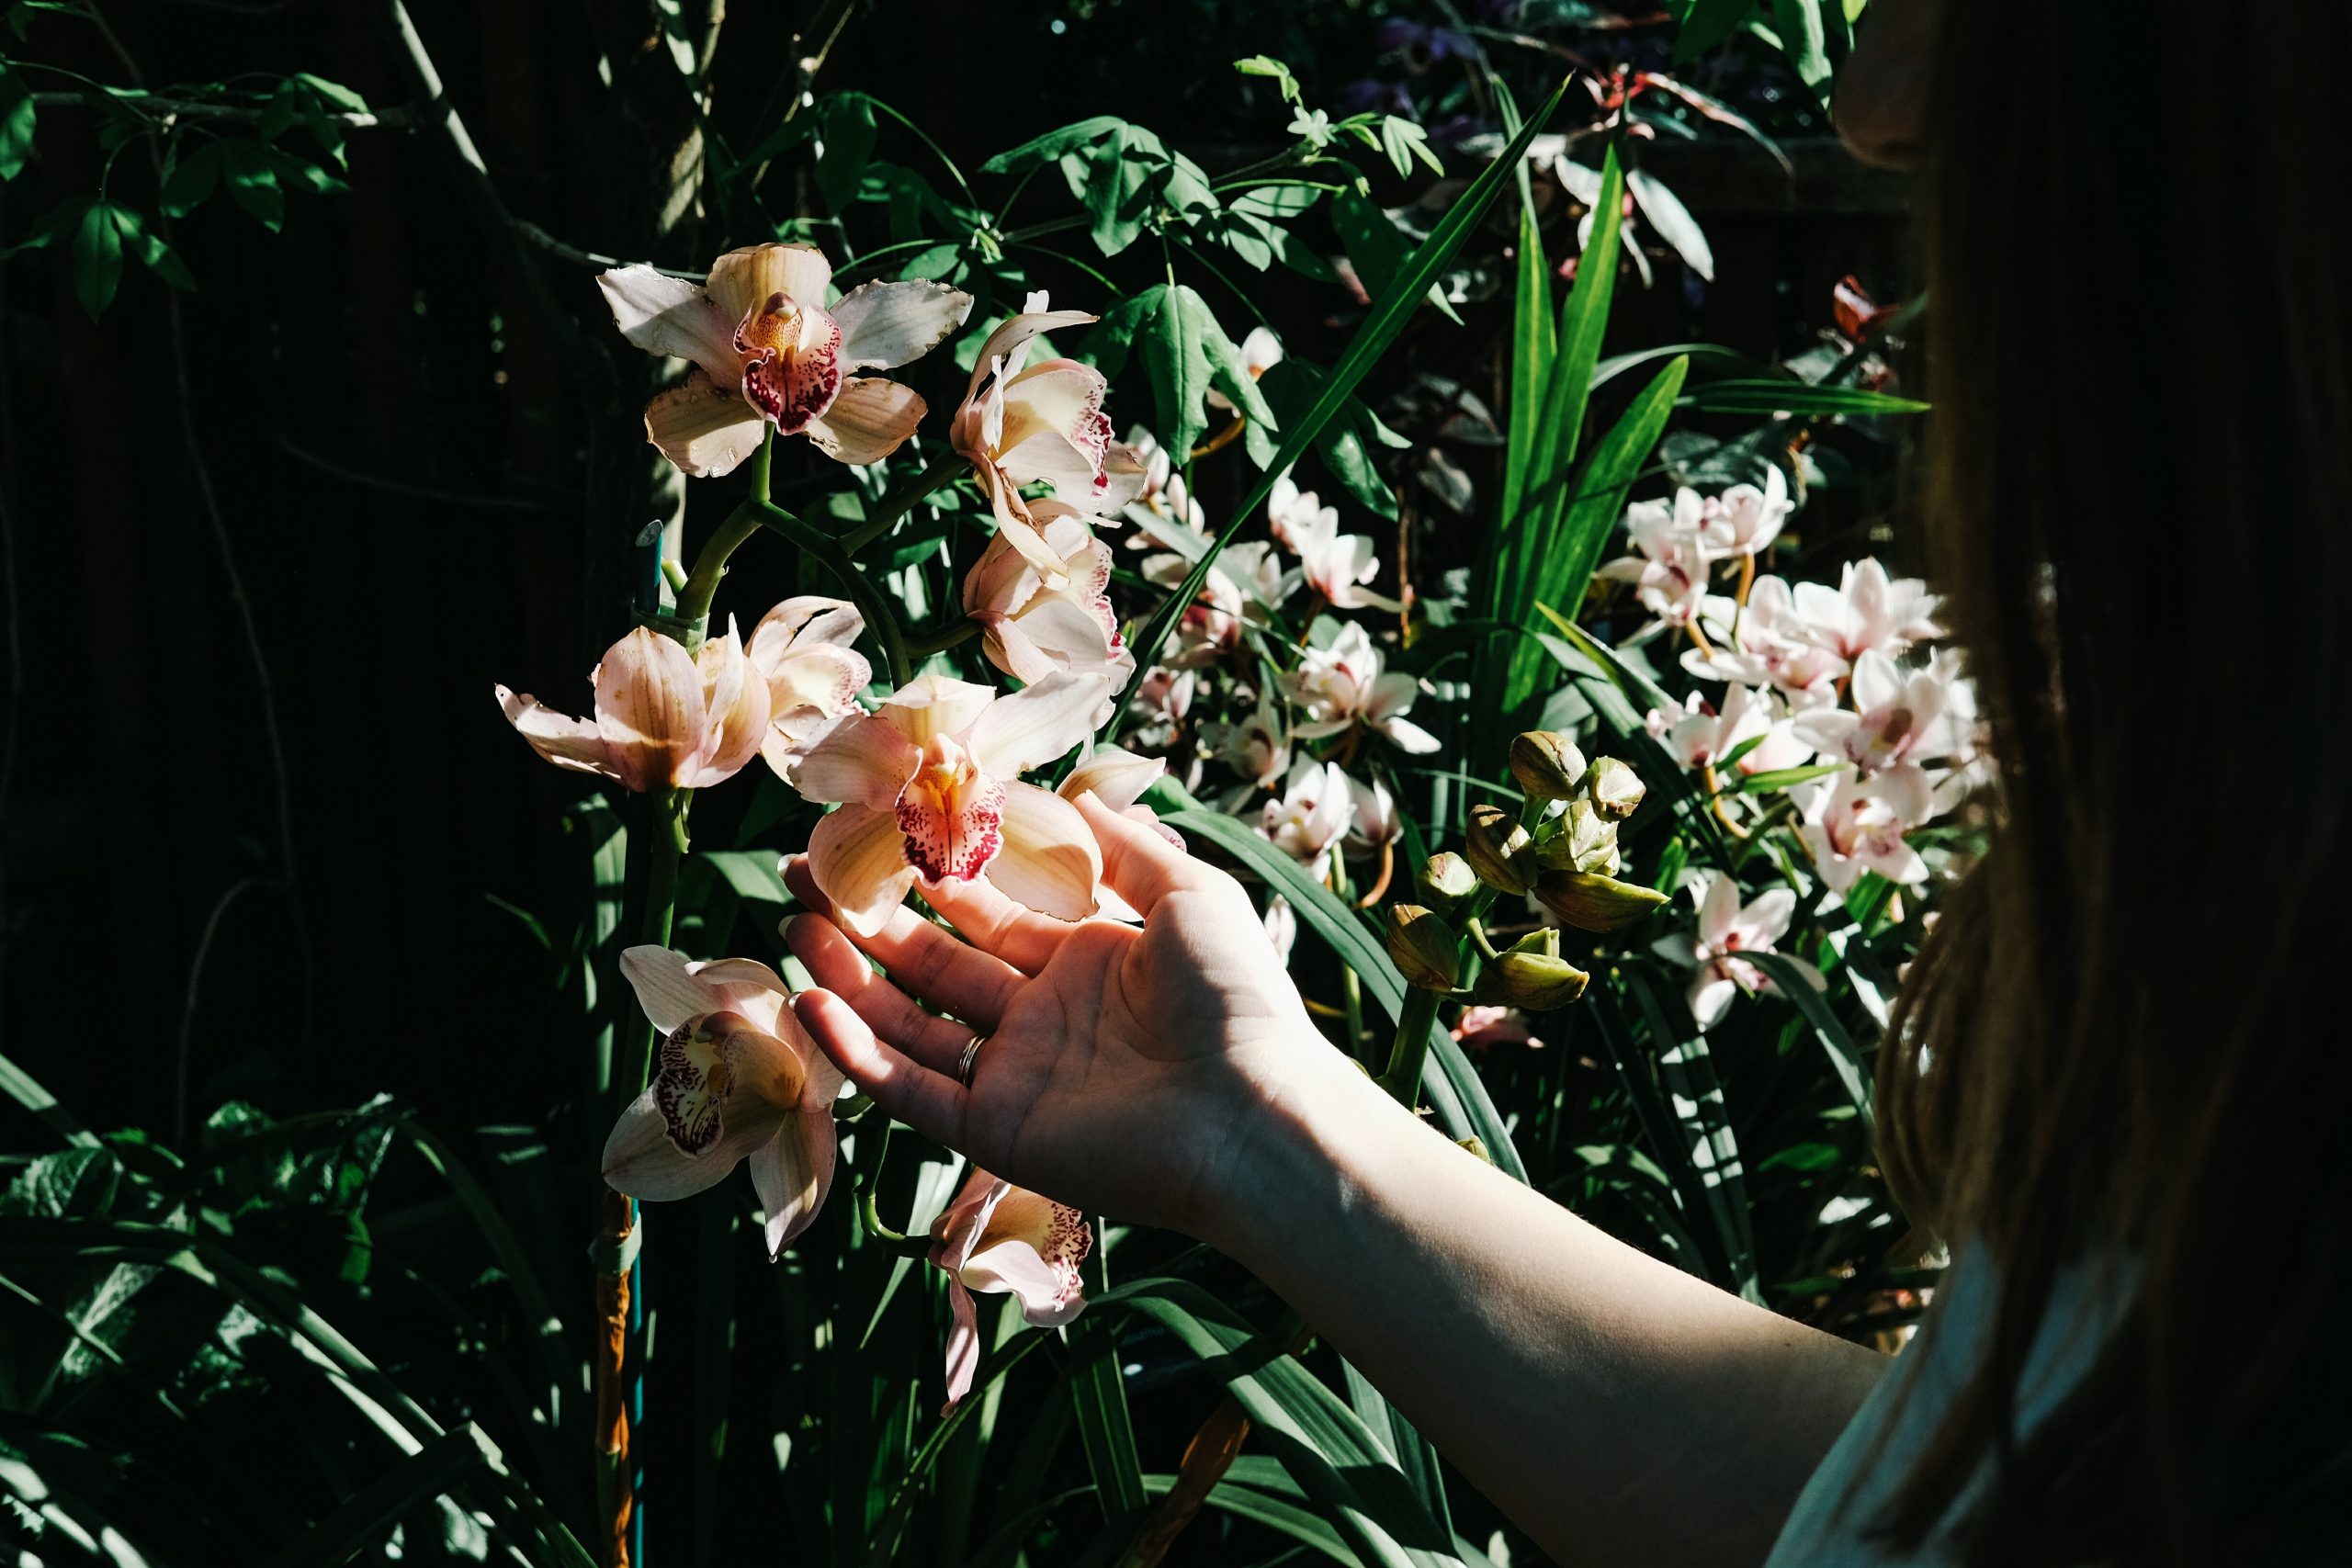 hand reaching out to hold a white and light pink flower amongst lush green leaves